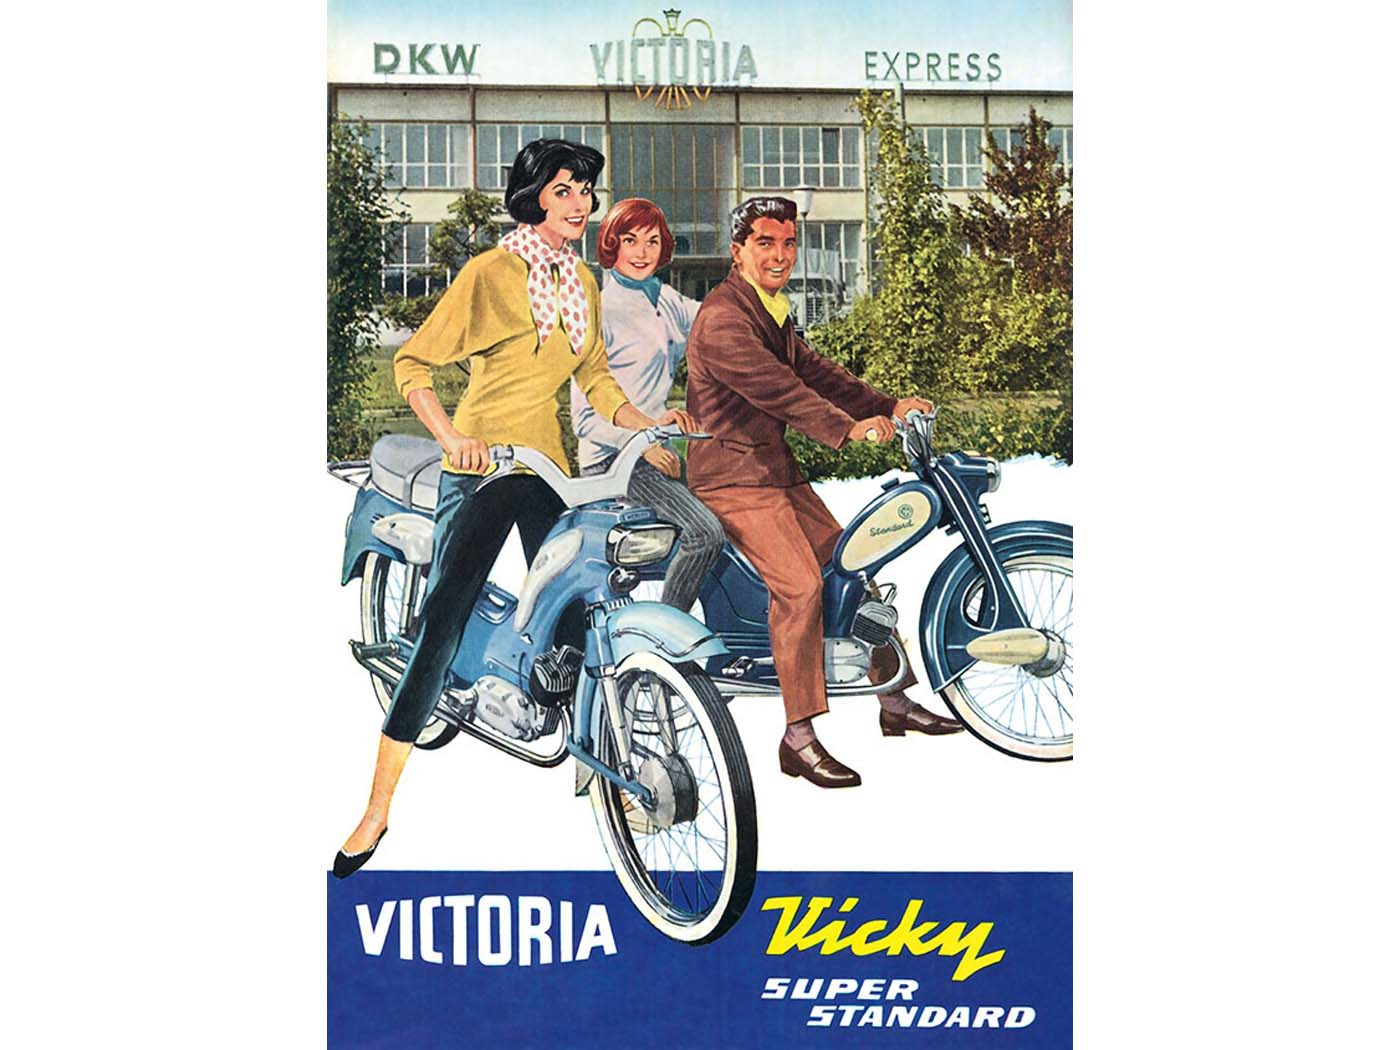 Advertising Poster 60s For Victoria Vicky Standard Super Luxury DKW Express